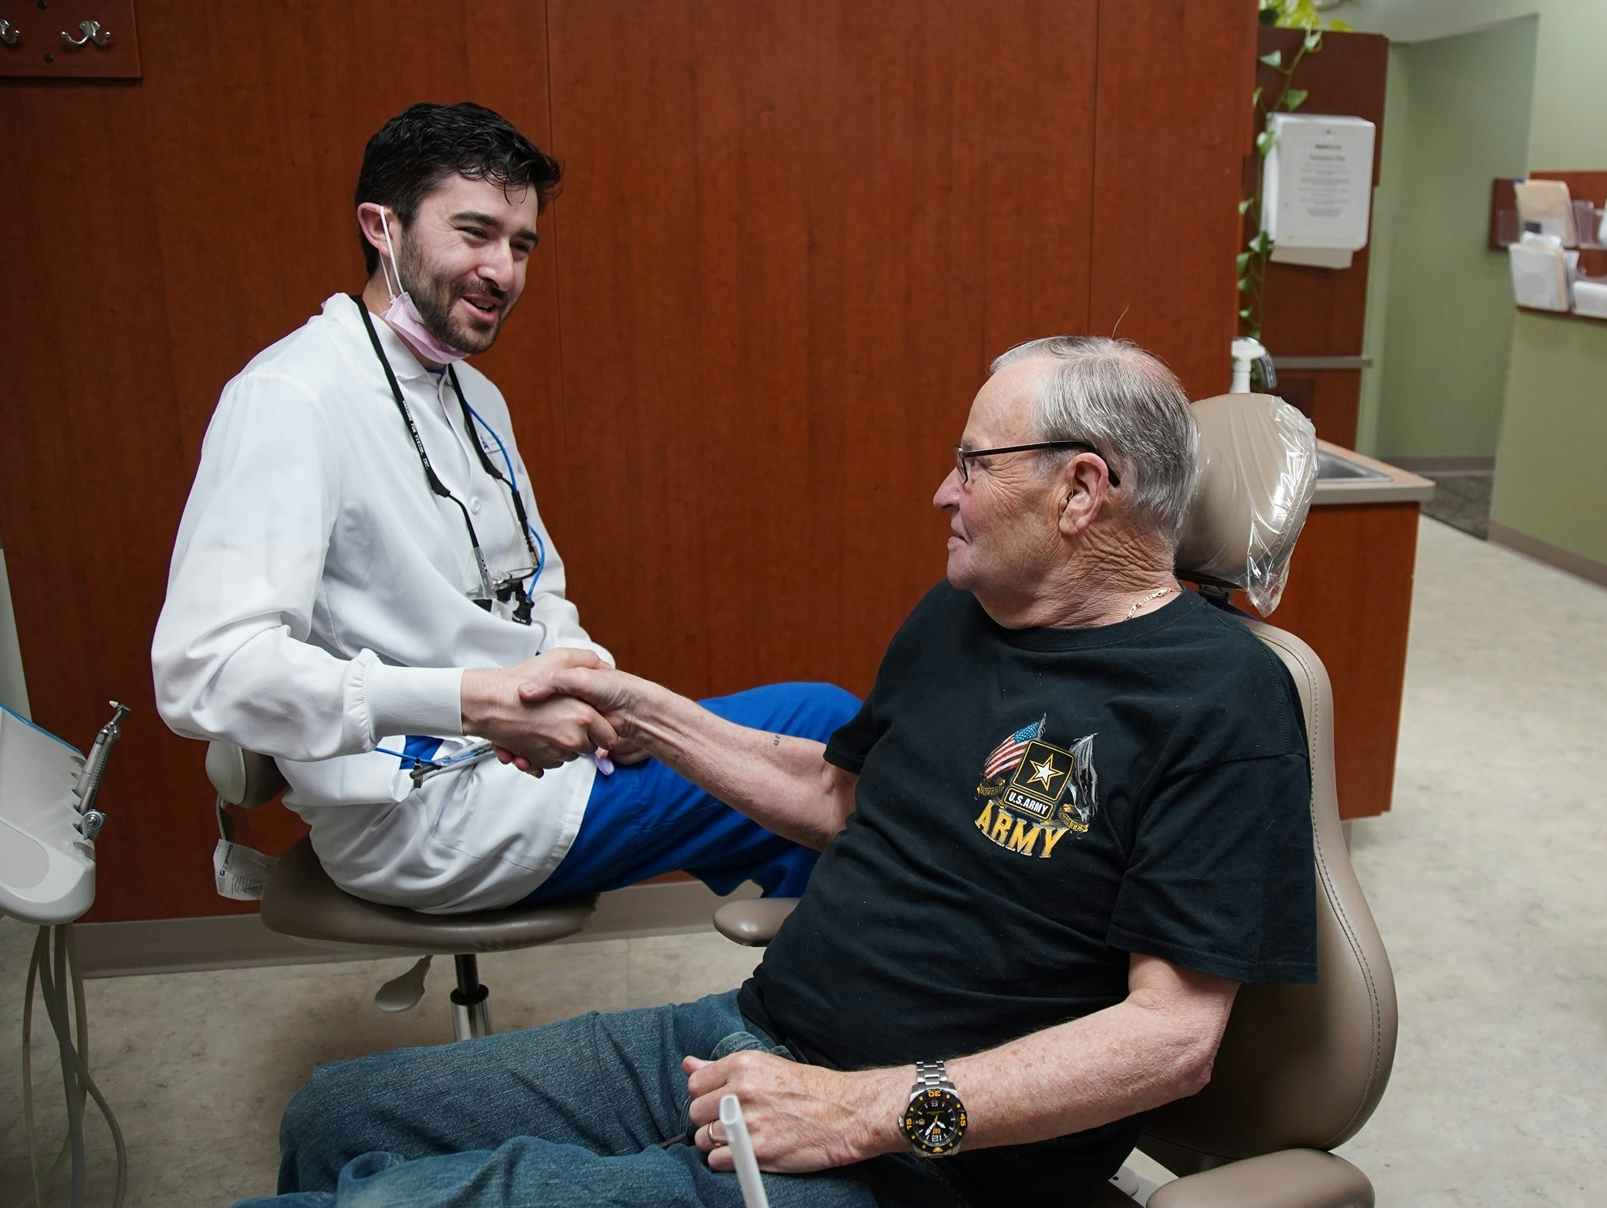 A dentist shaking the hand of a military veteran in sitting in their office